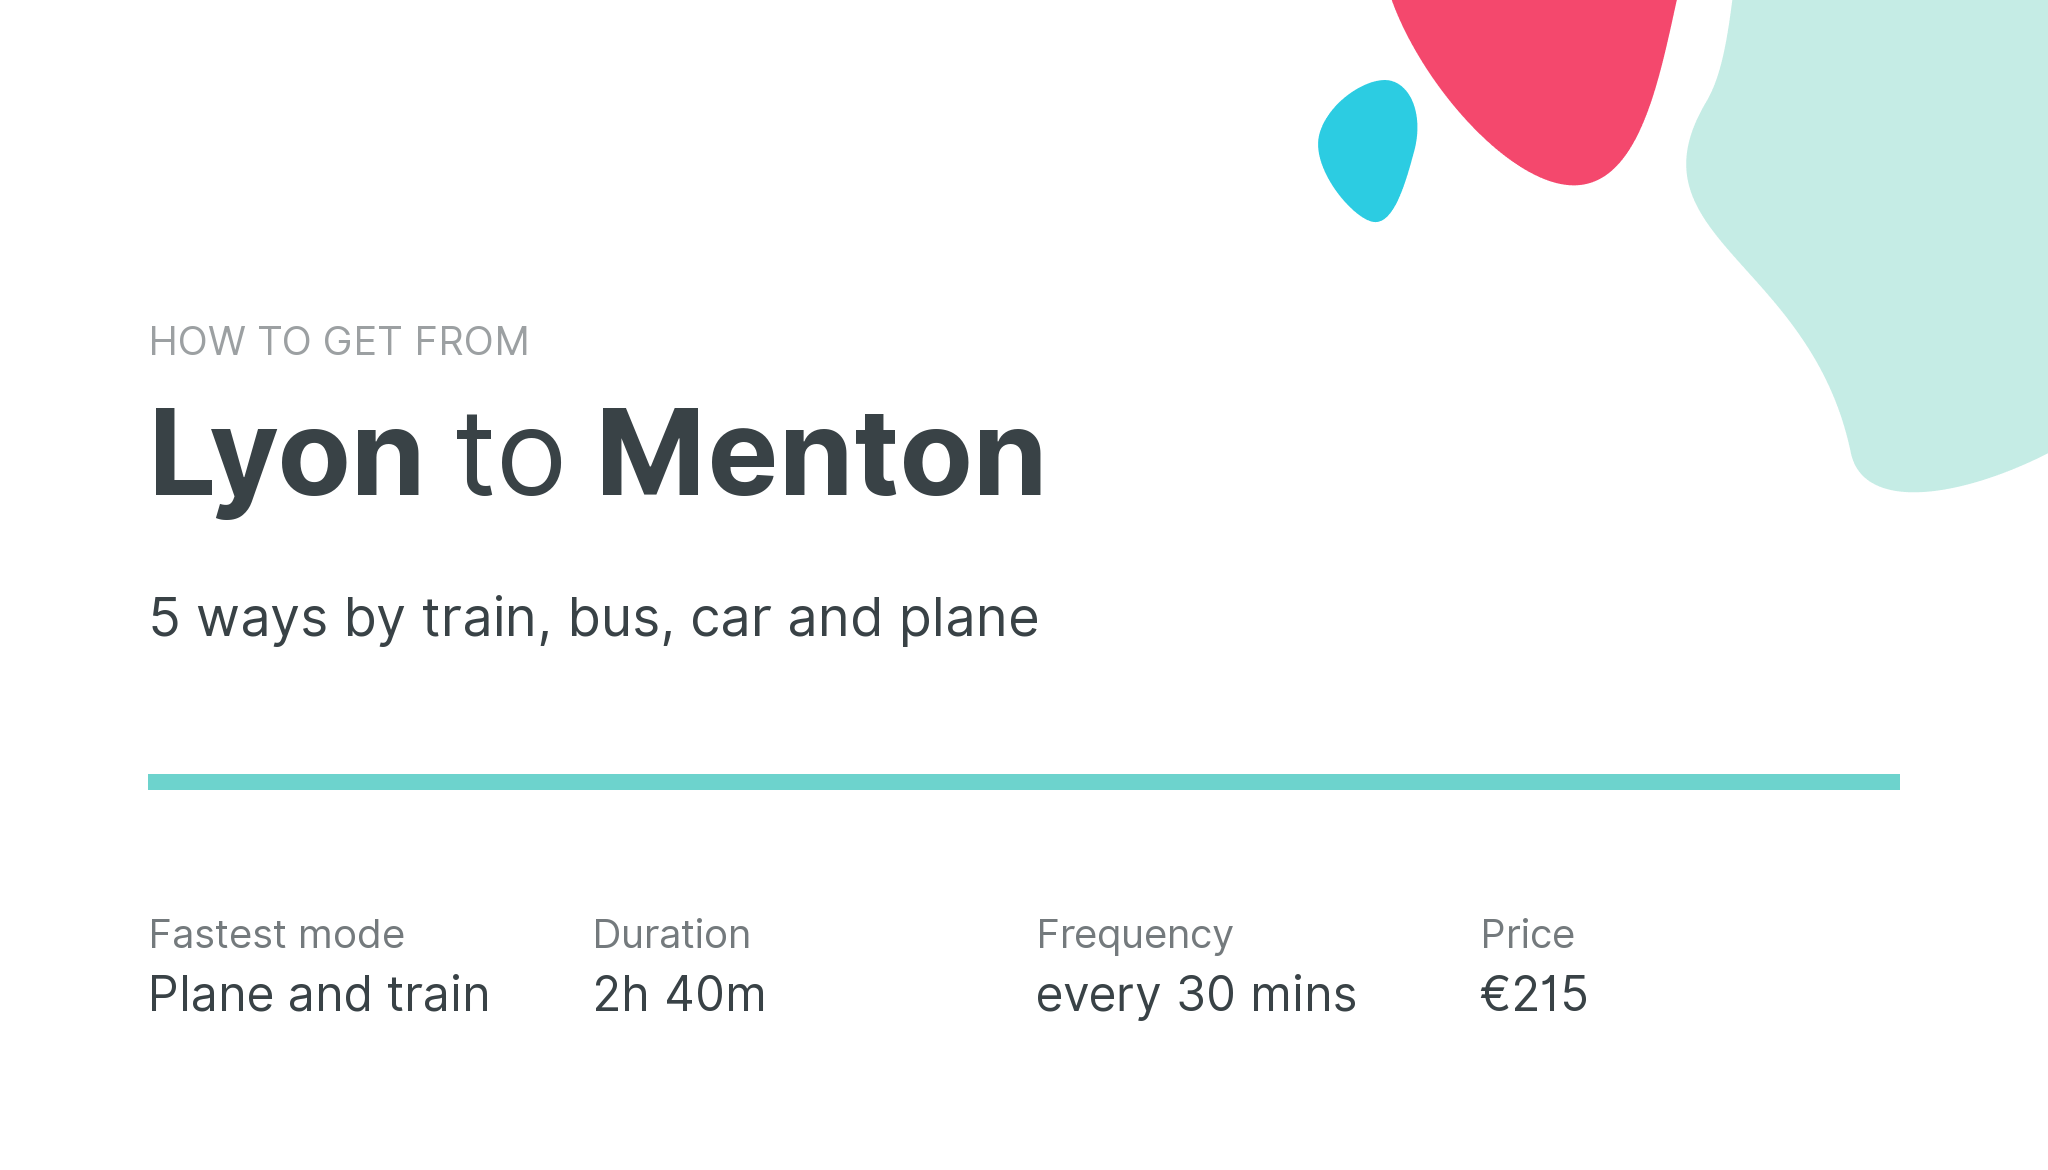 How do I get from Lyon to Menton